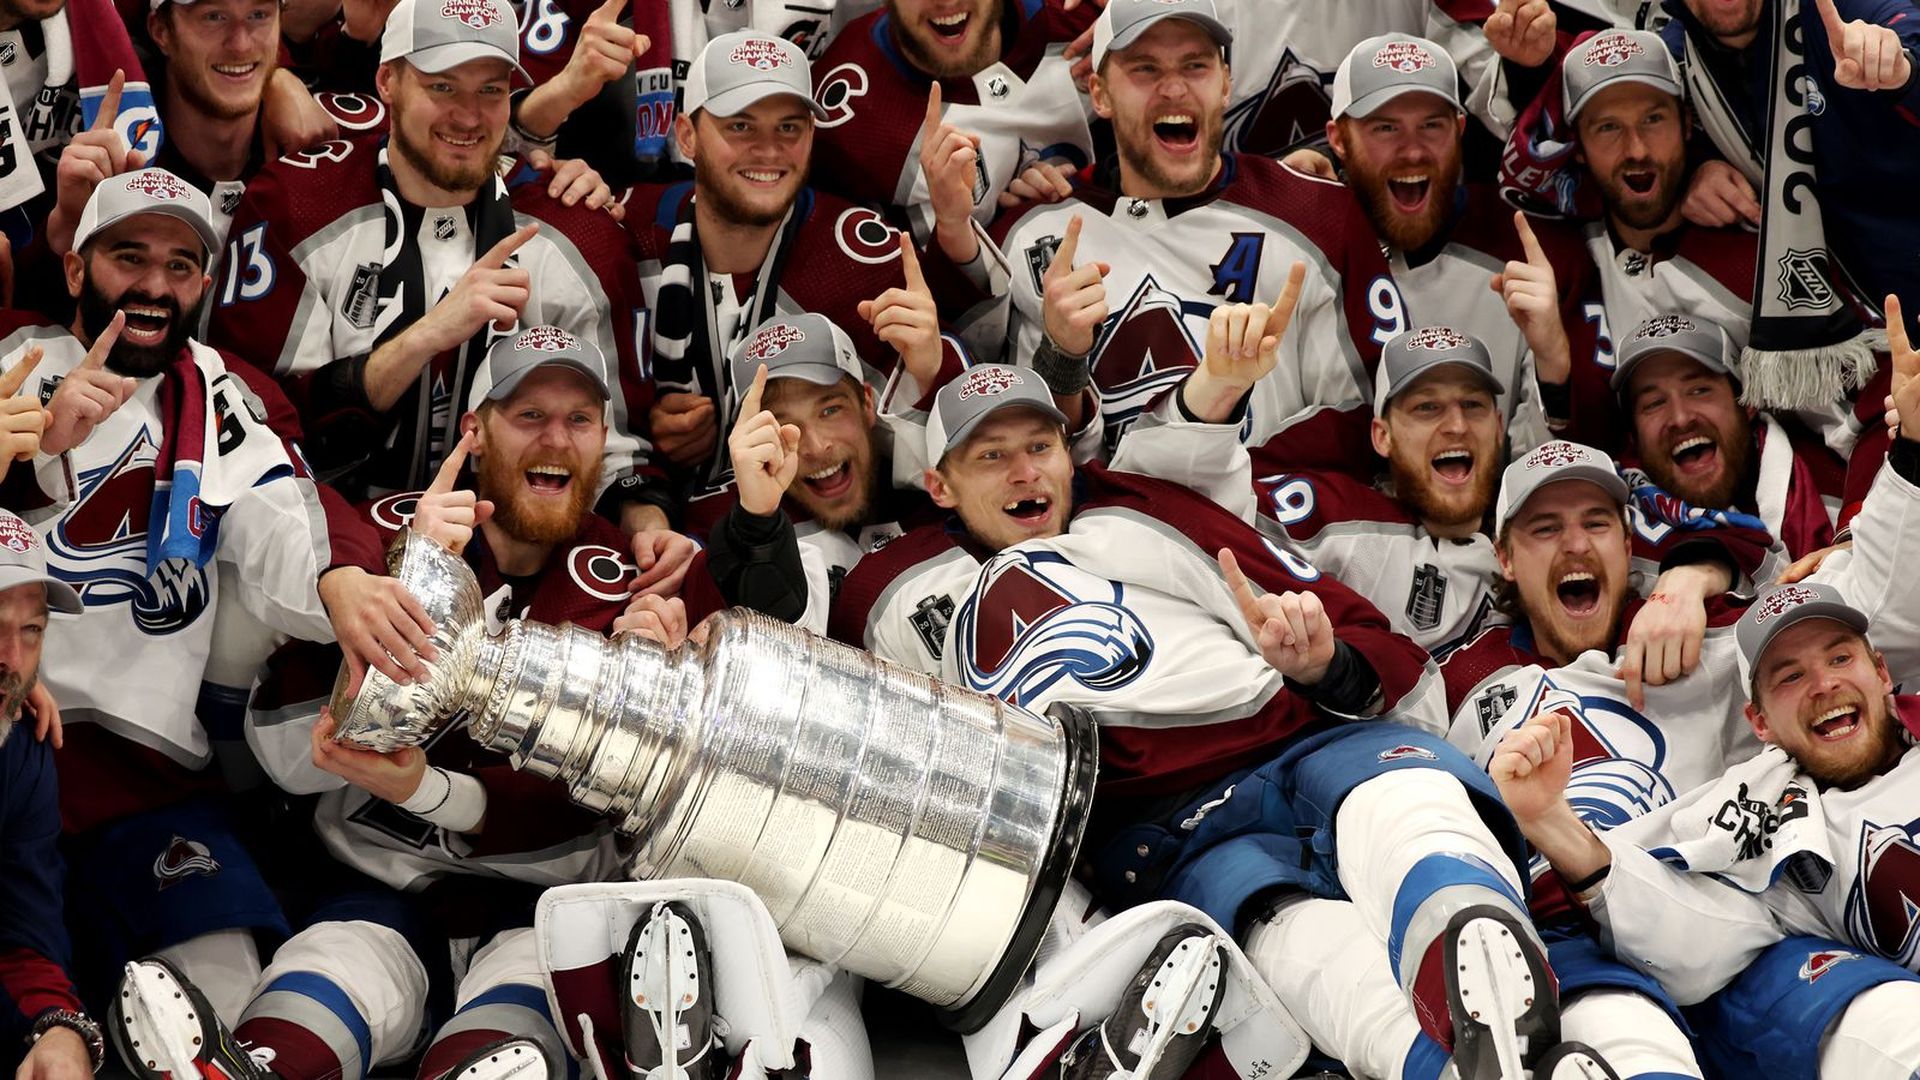 The Colorado Avalanche celebrate with the Stanley Cup.